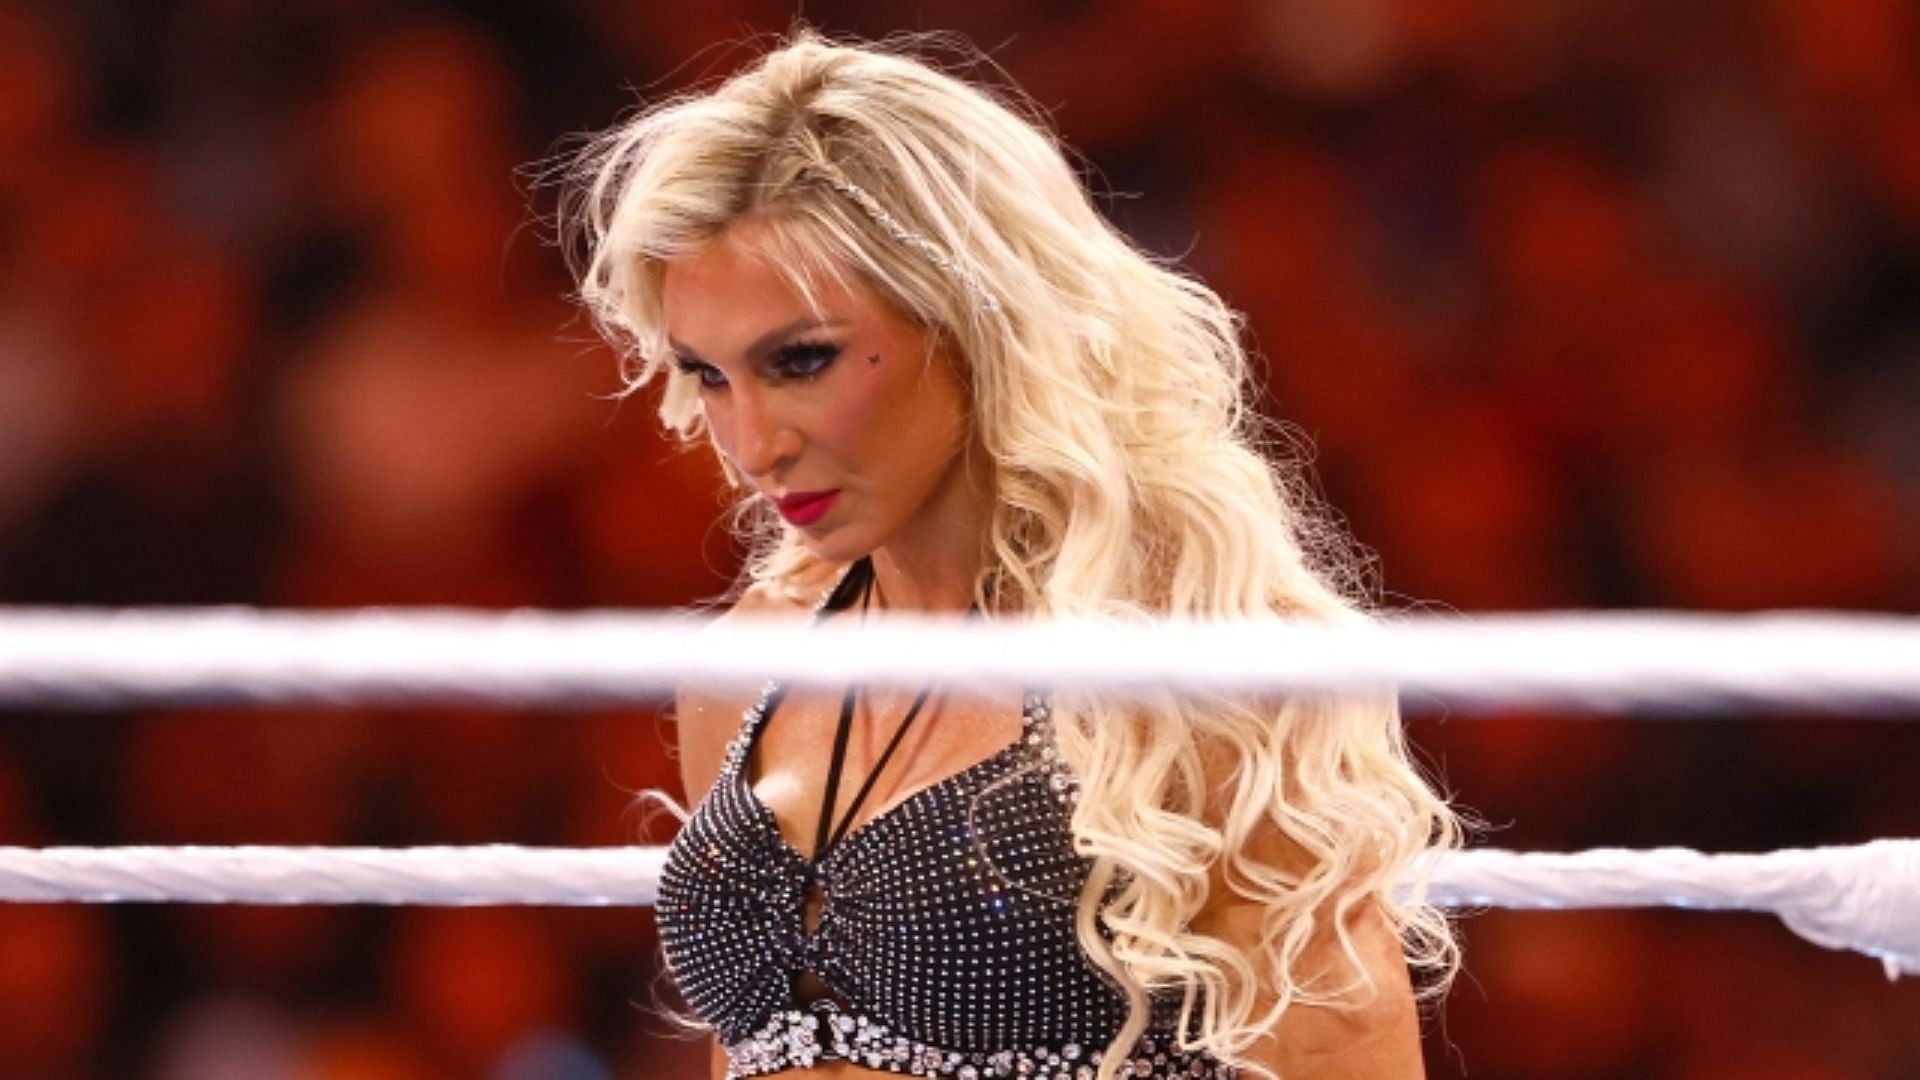 Charlotte Flair recently lost the SmackDown Women